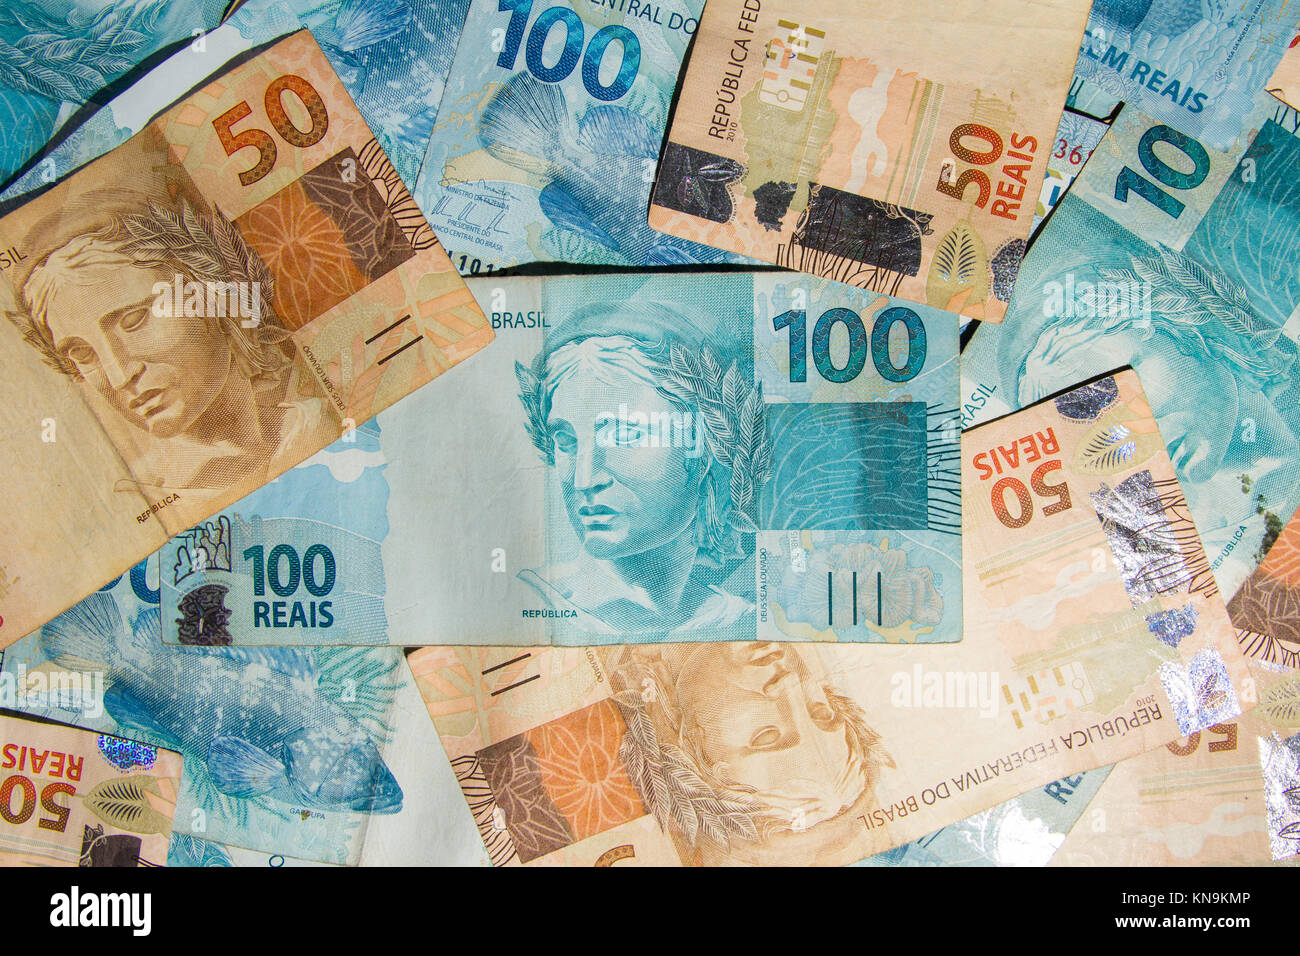 50 Reais notes, Currency of Brazil Stock Photo - Alamy